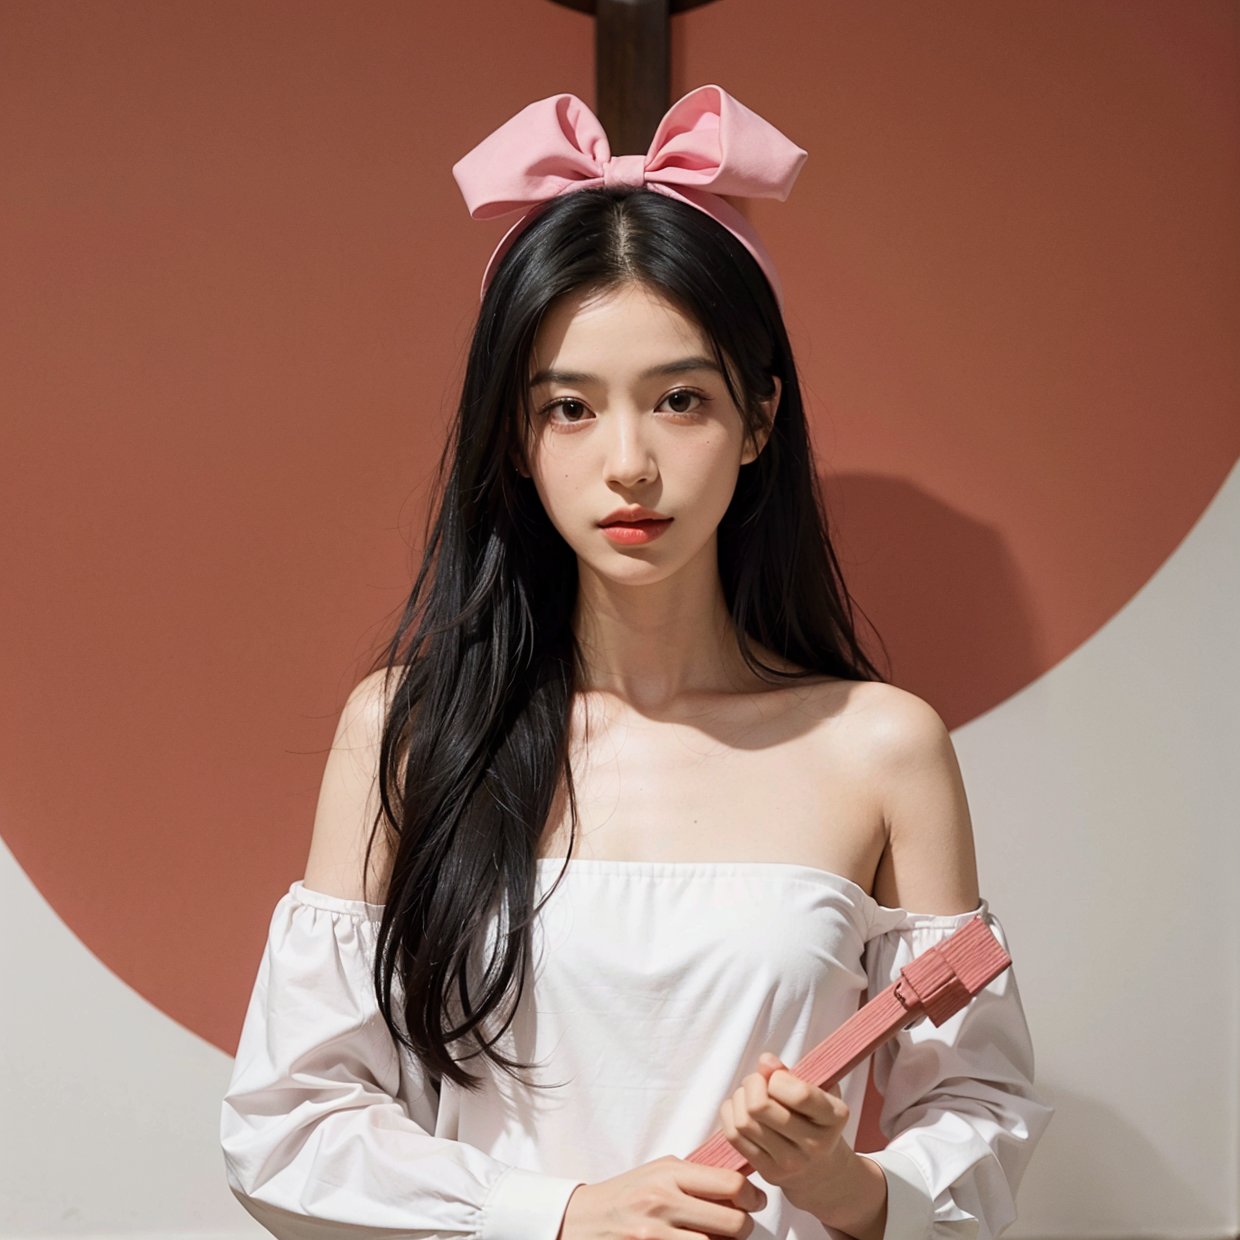 Colaki, surrealist, rescue, Hilma af Klint style, a girl with long straight black hair, pink bow headband, compass on left hand, spear,